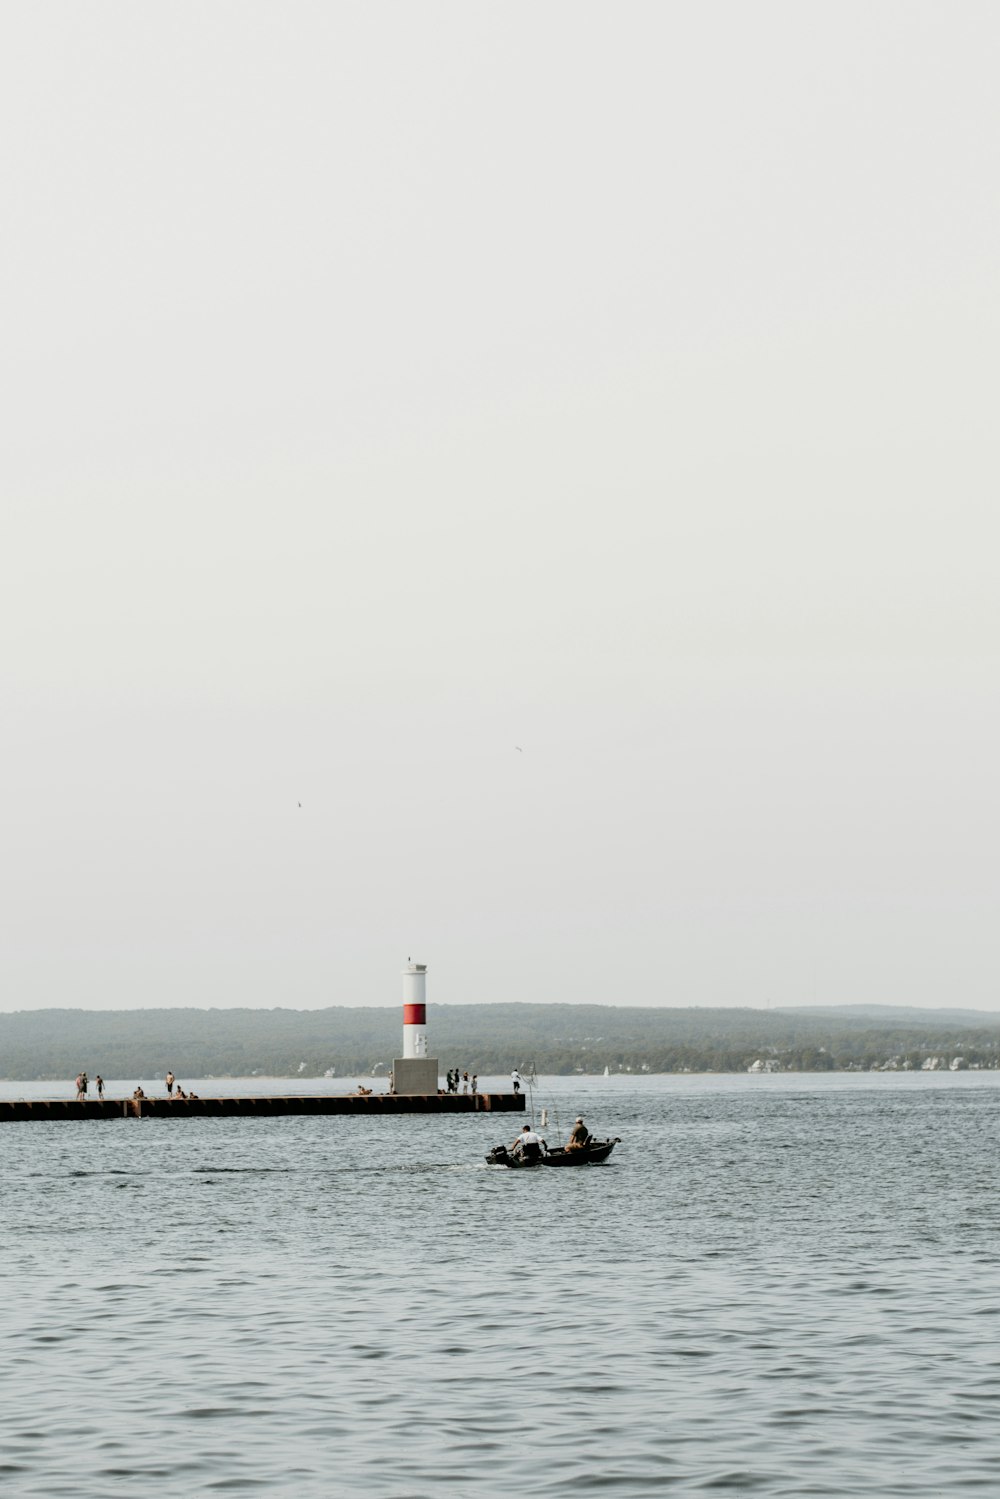 boat on body of water with lighthouse background